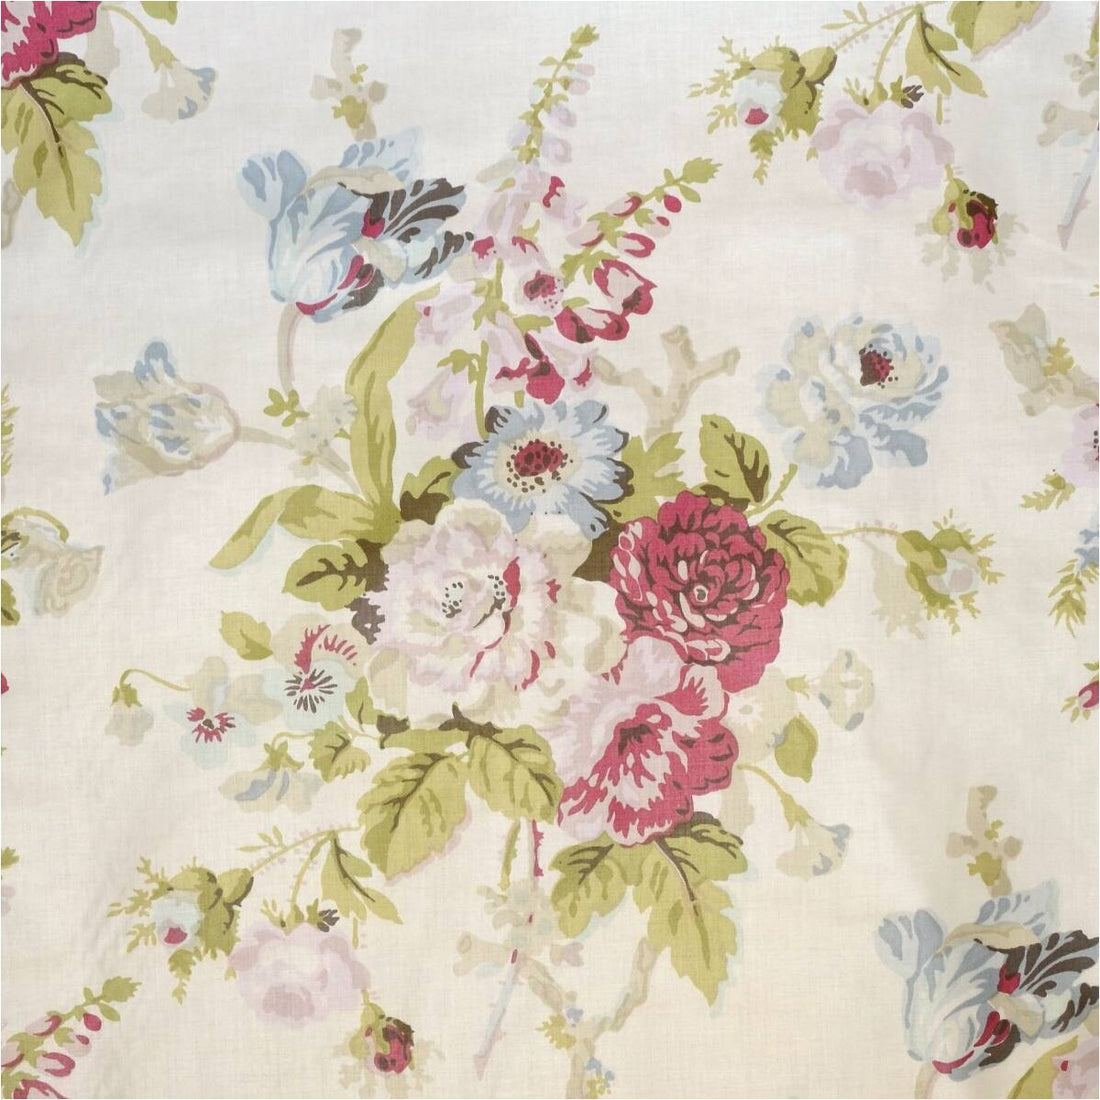 Grenville Glazed Chintz fabric in pink/green color - pattern BFC-3690.73.0 - by Lee Jofa in the Blithfield collection